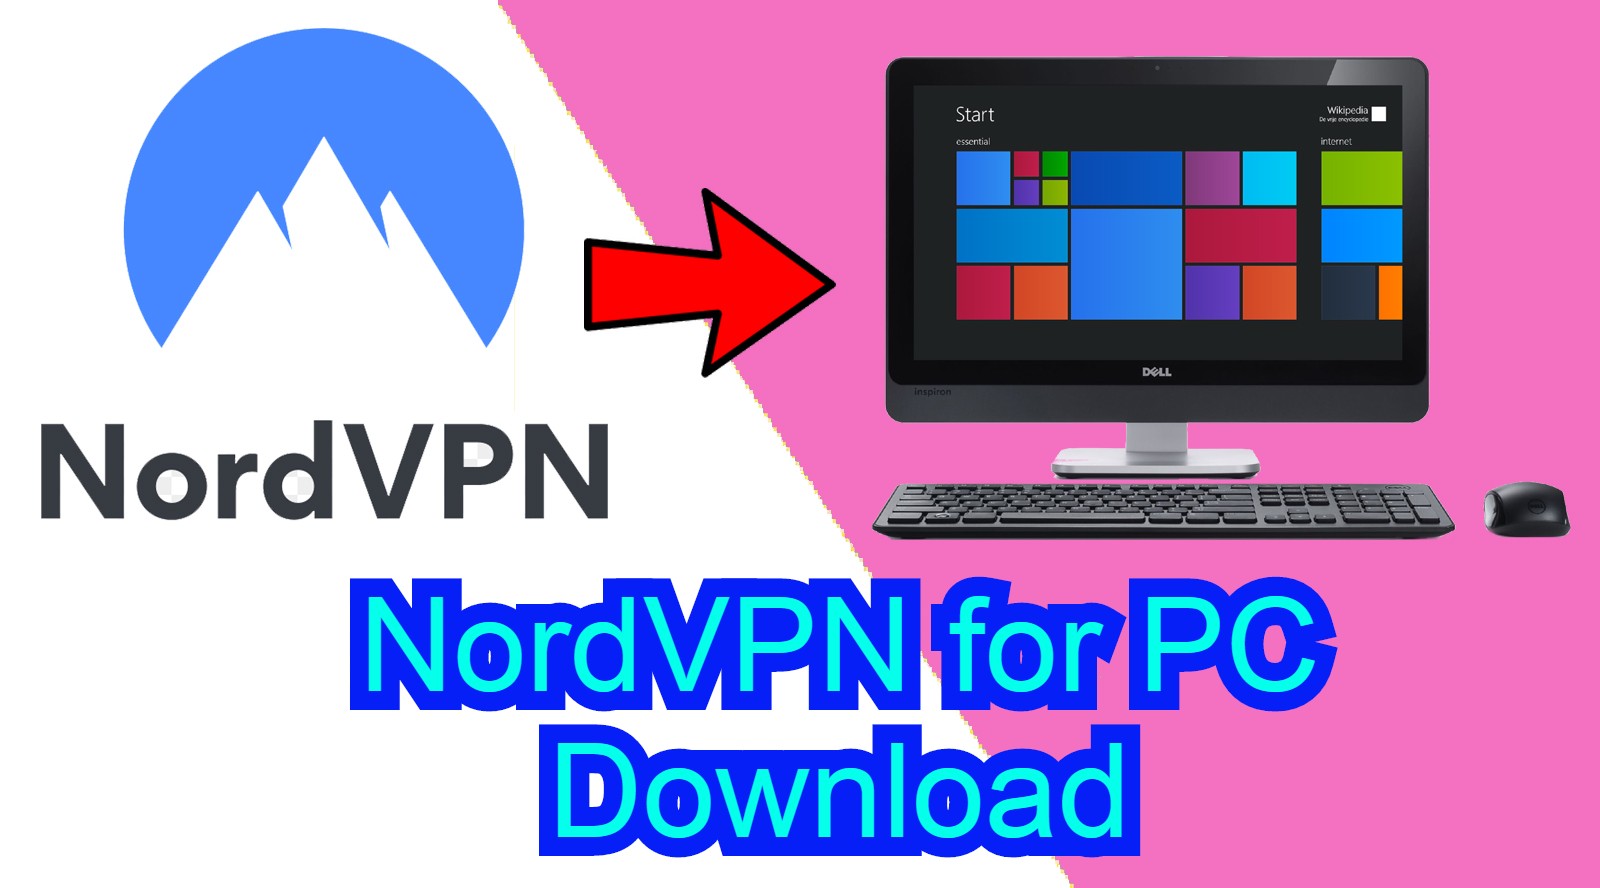 nordvpn for pc free download